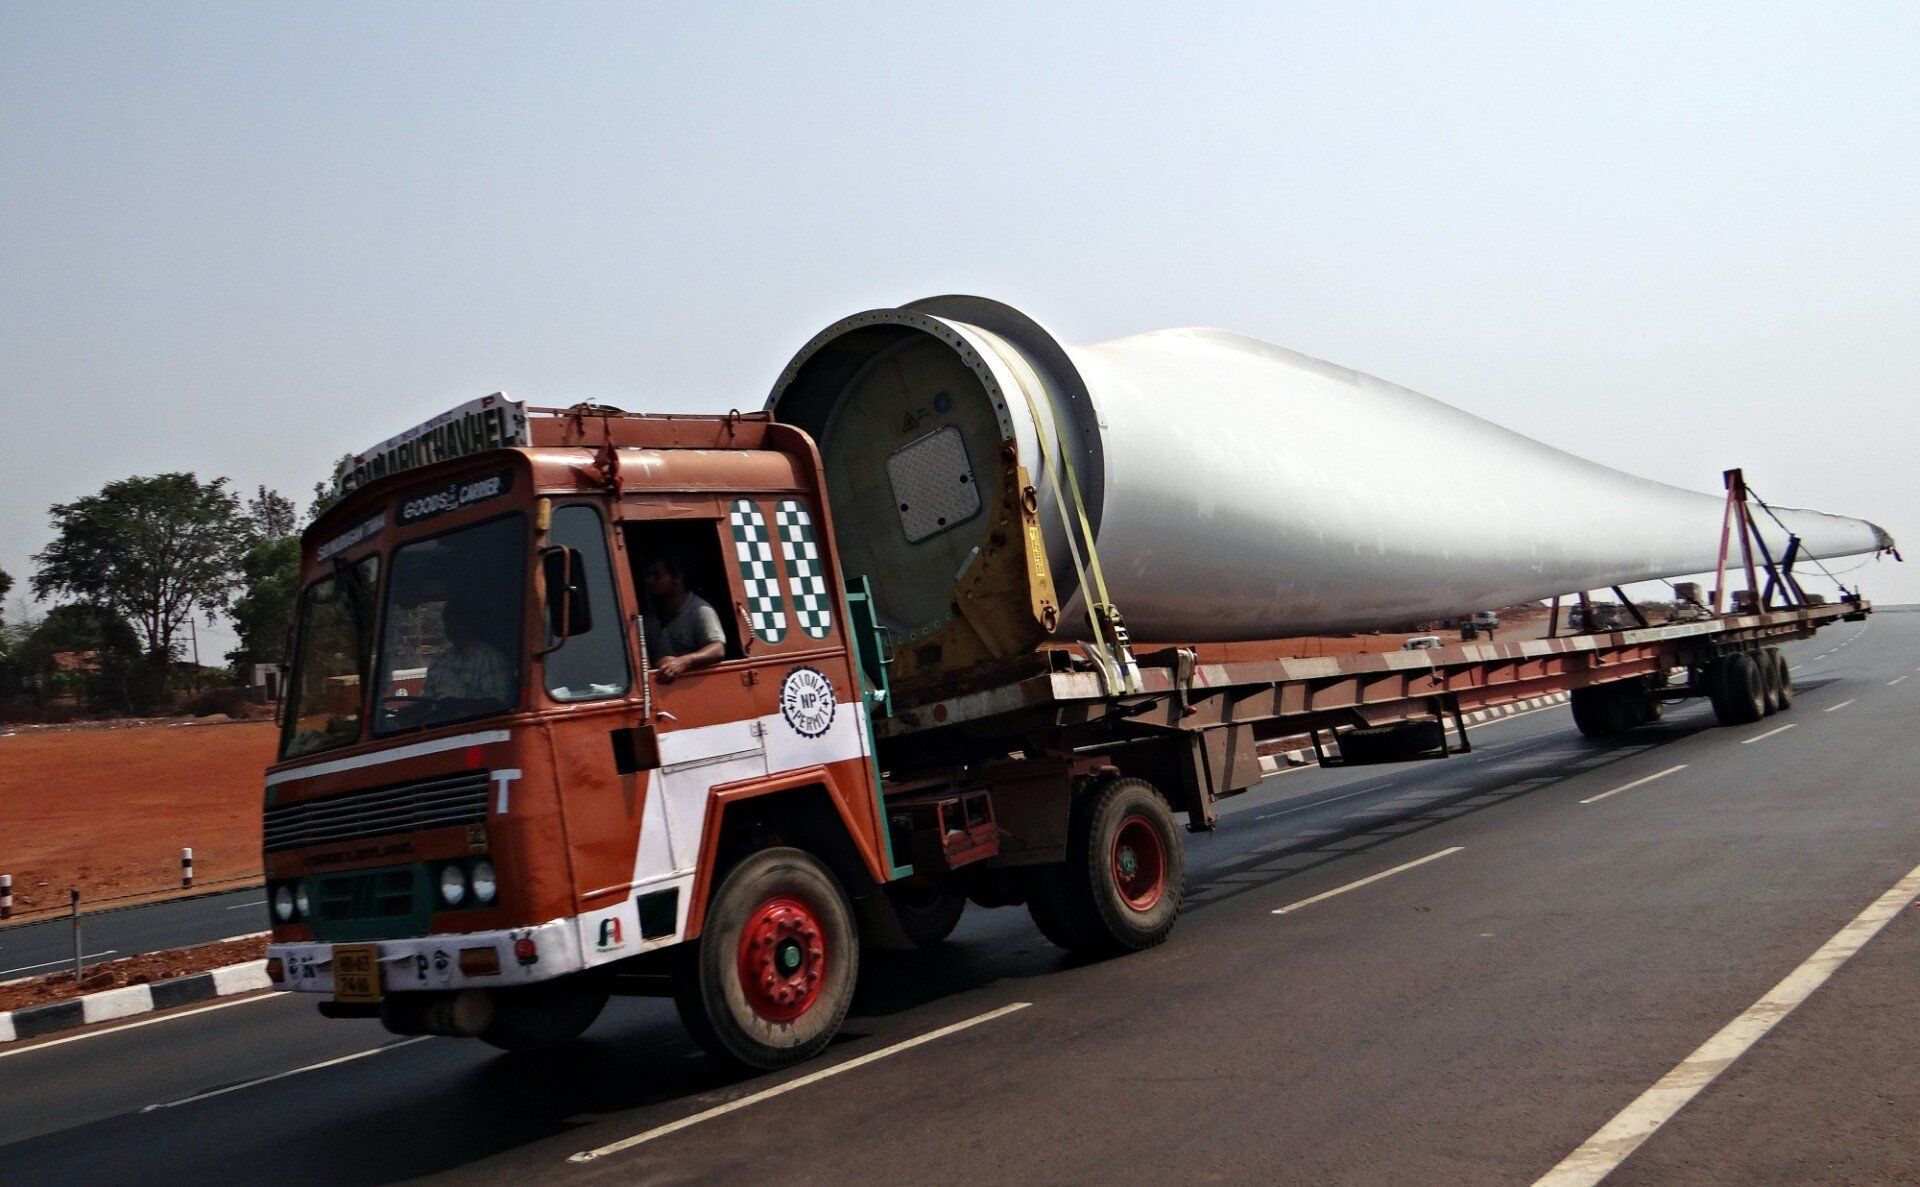 A truck is driving down a highway carrying a large cylinder